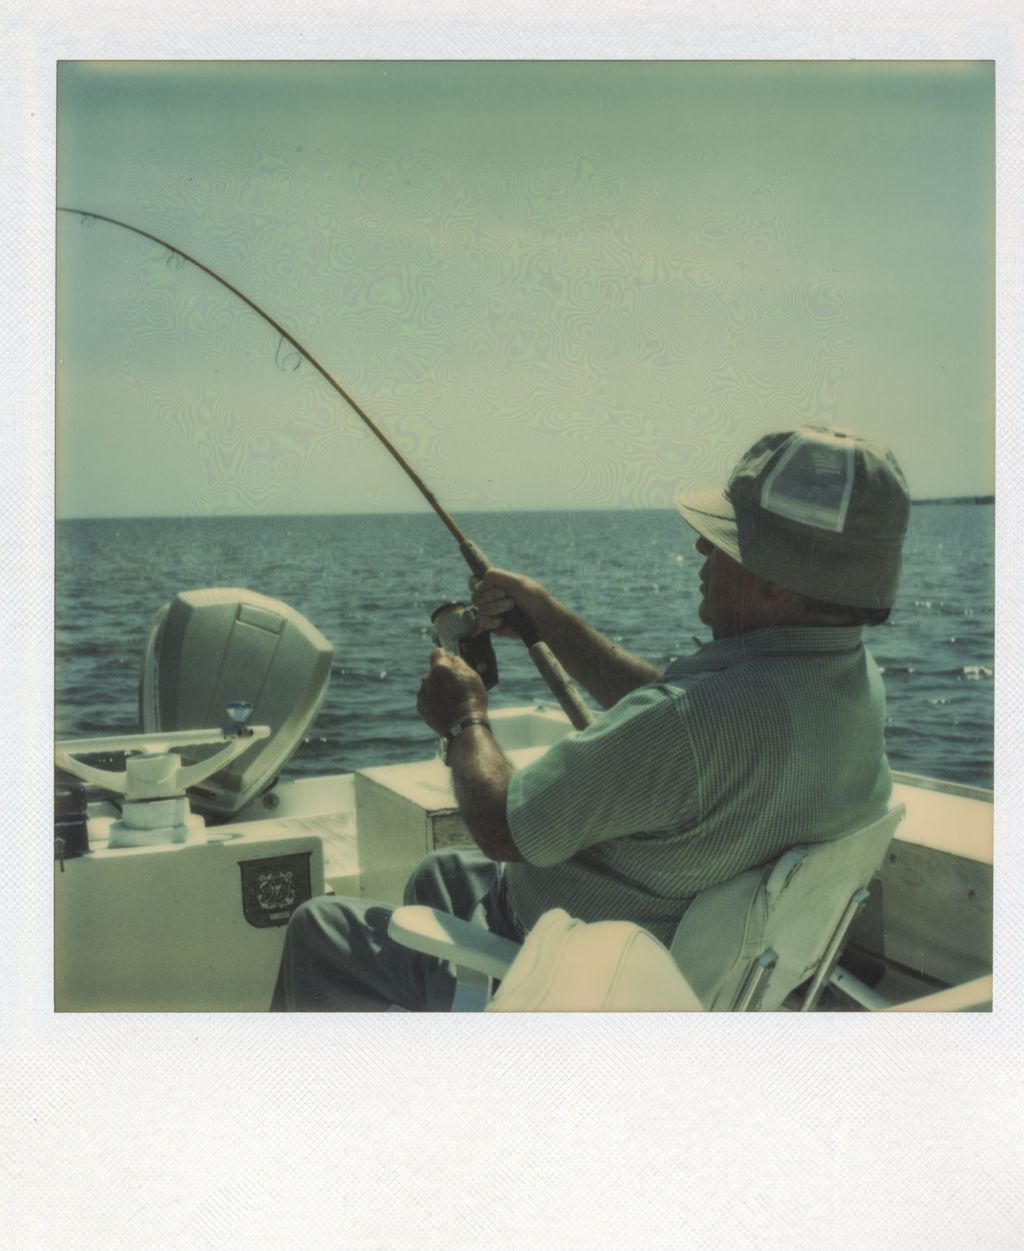 Miniature of Richard J. Daley fishing from a boat